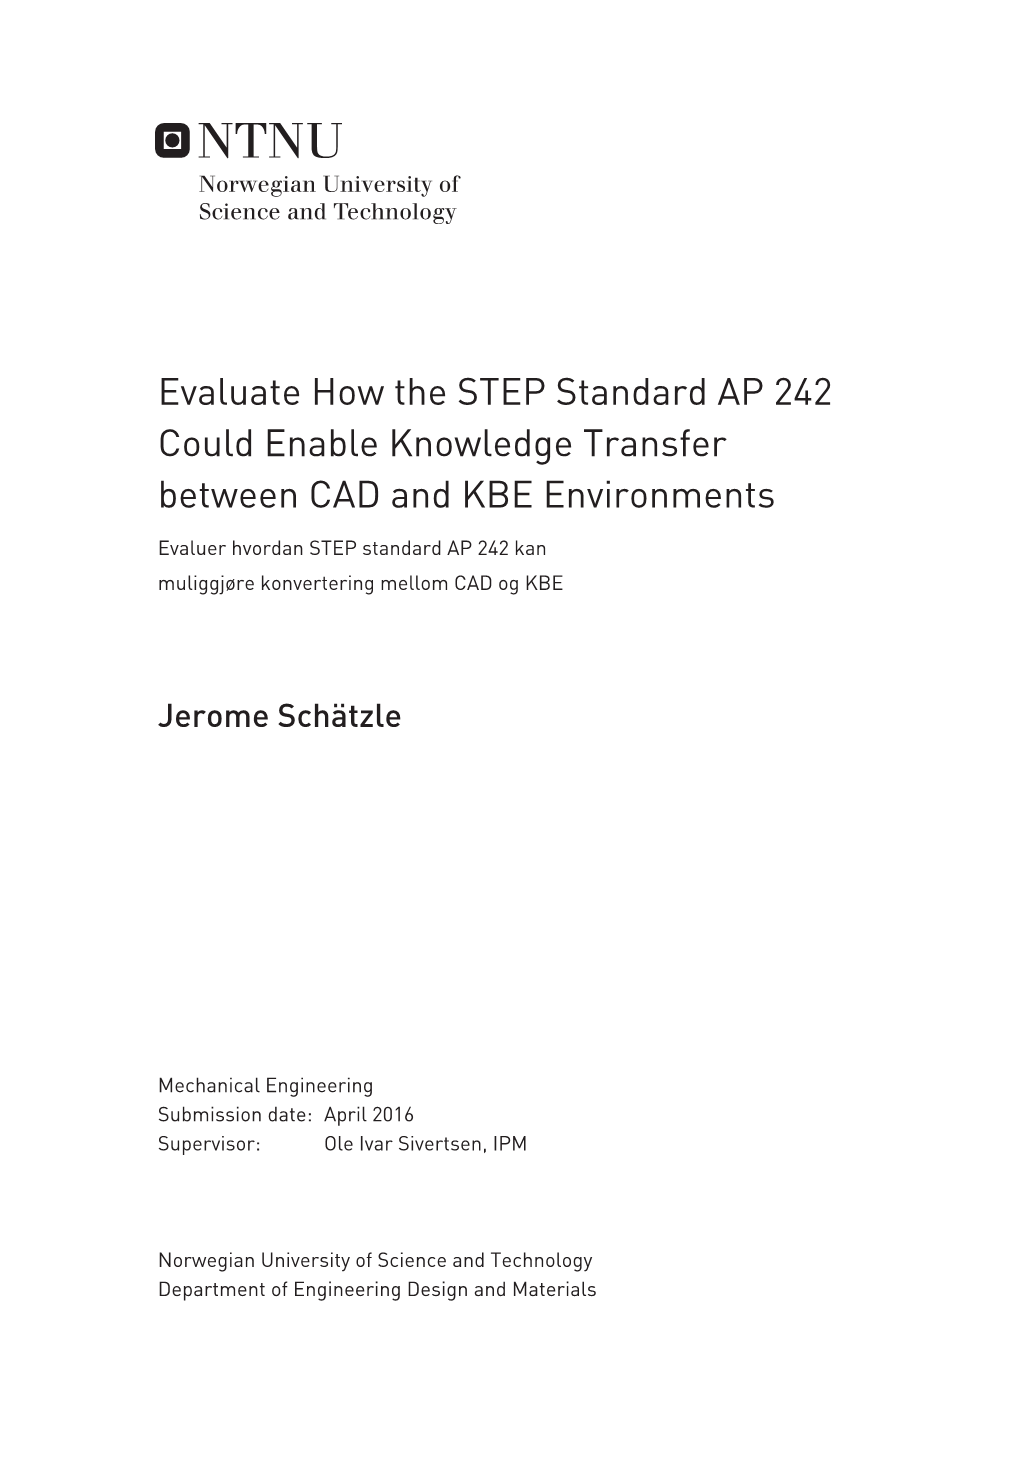 Evaluate How the STEP Standard AP 242 Could Enable Knowledge Transfer Between CAD and KBE Environments